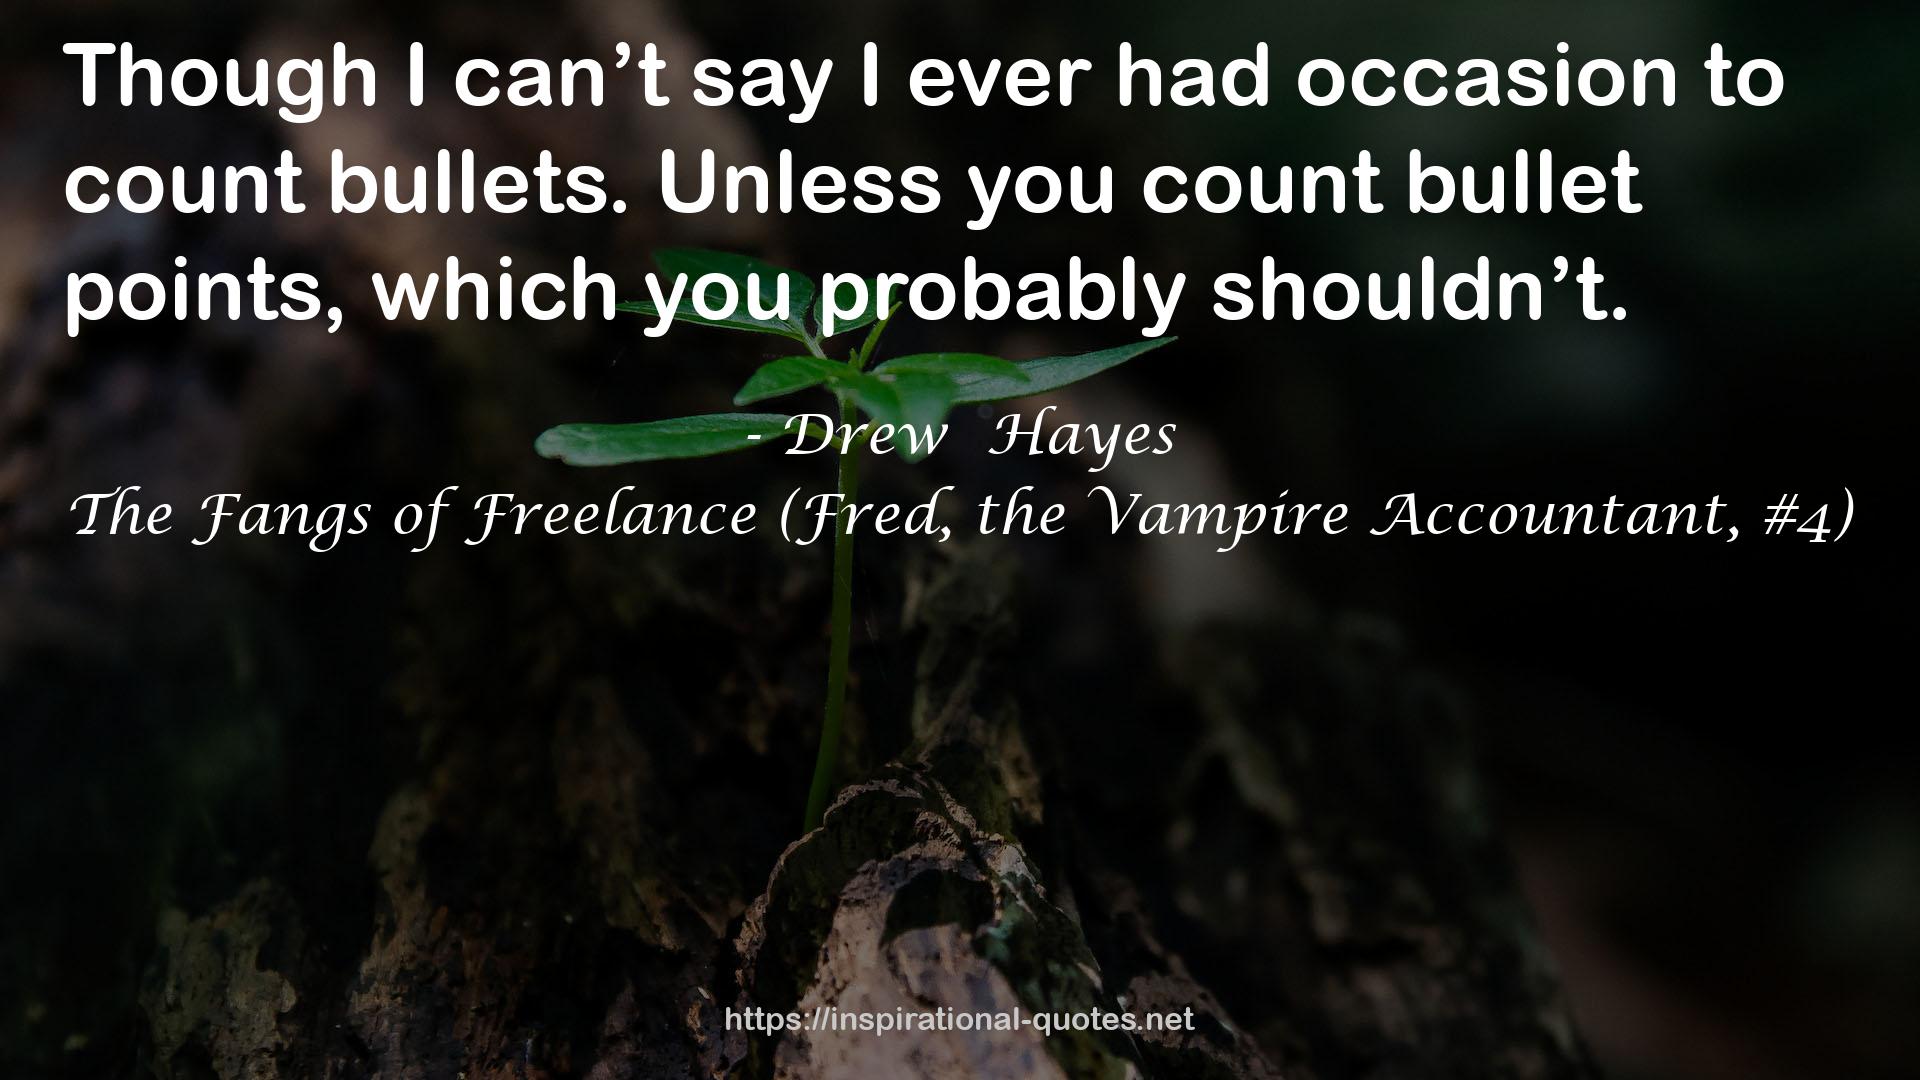 The Fangs of Freelance (Fred, the Vampire Accountant, #4) QUOTES